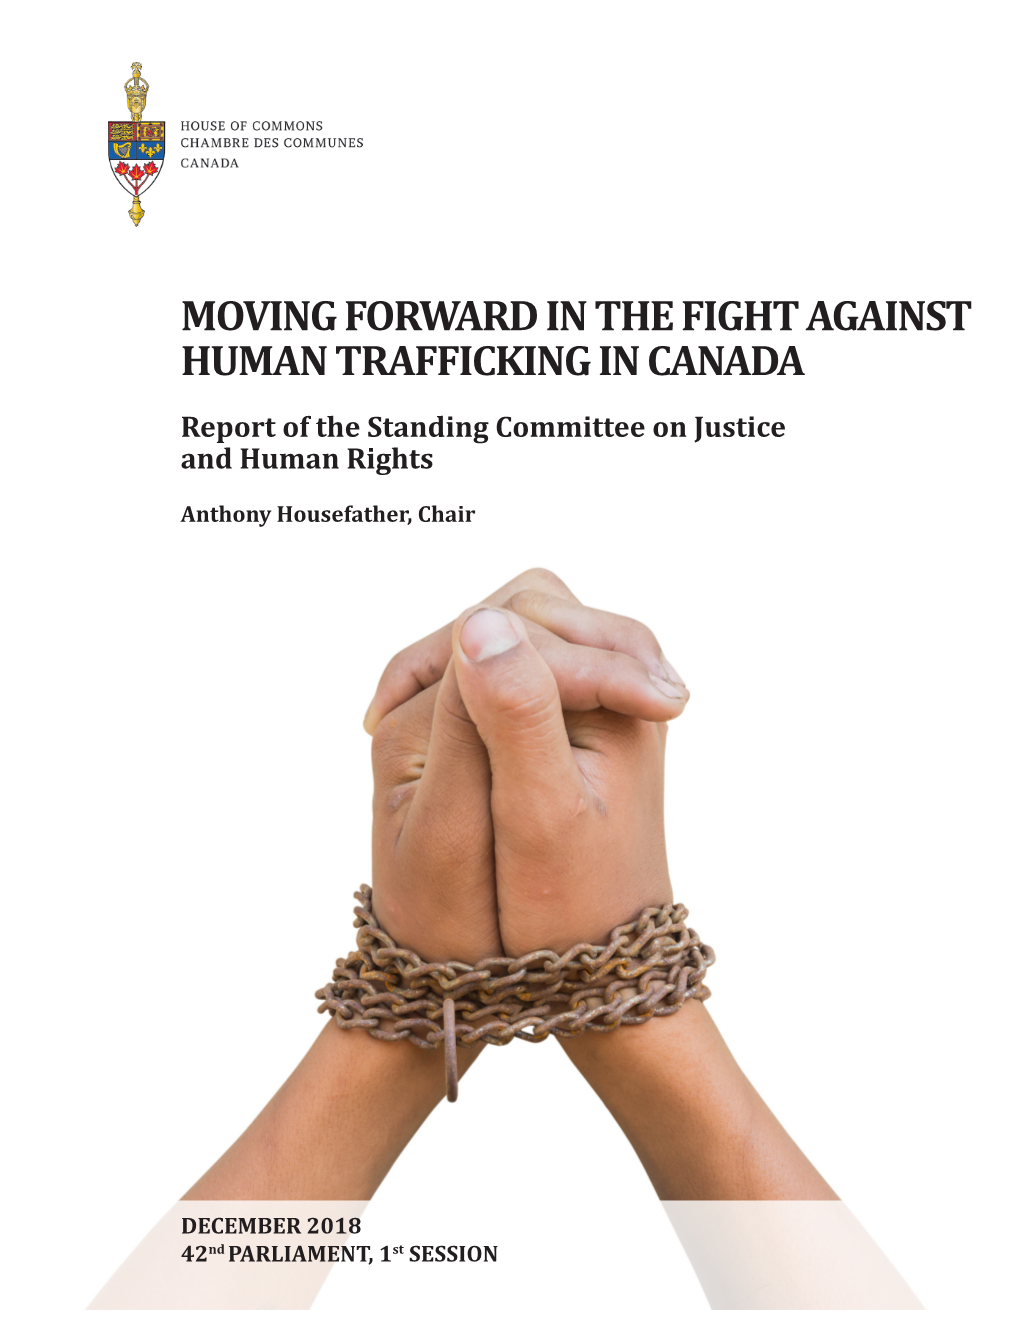 MOVING FORWARD in the FIGHT AGAINST HUMAN TRAFFICKING in CANADA Report of the Standing Committee on Justice and Human Rights